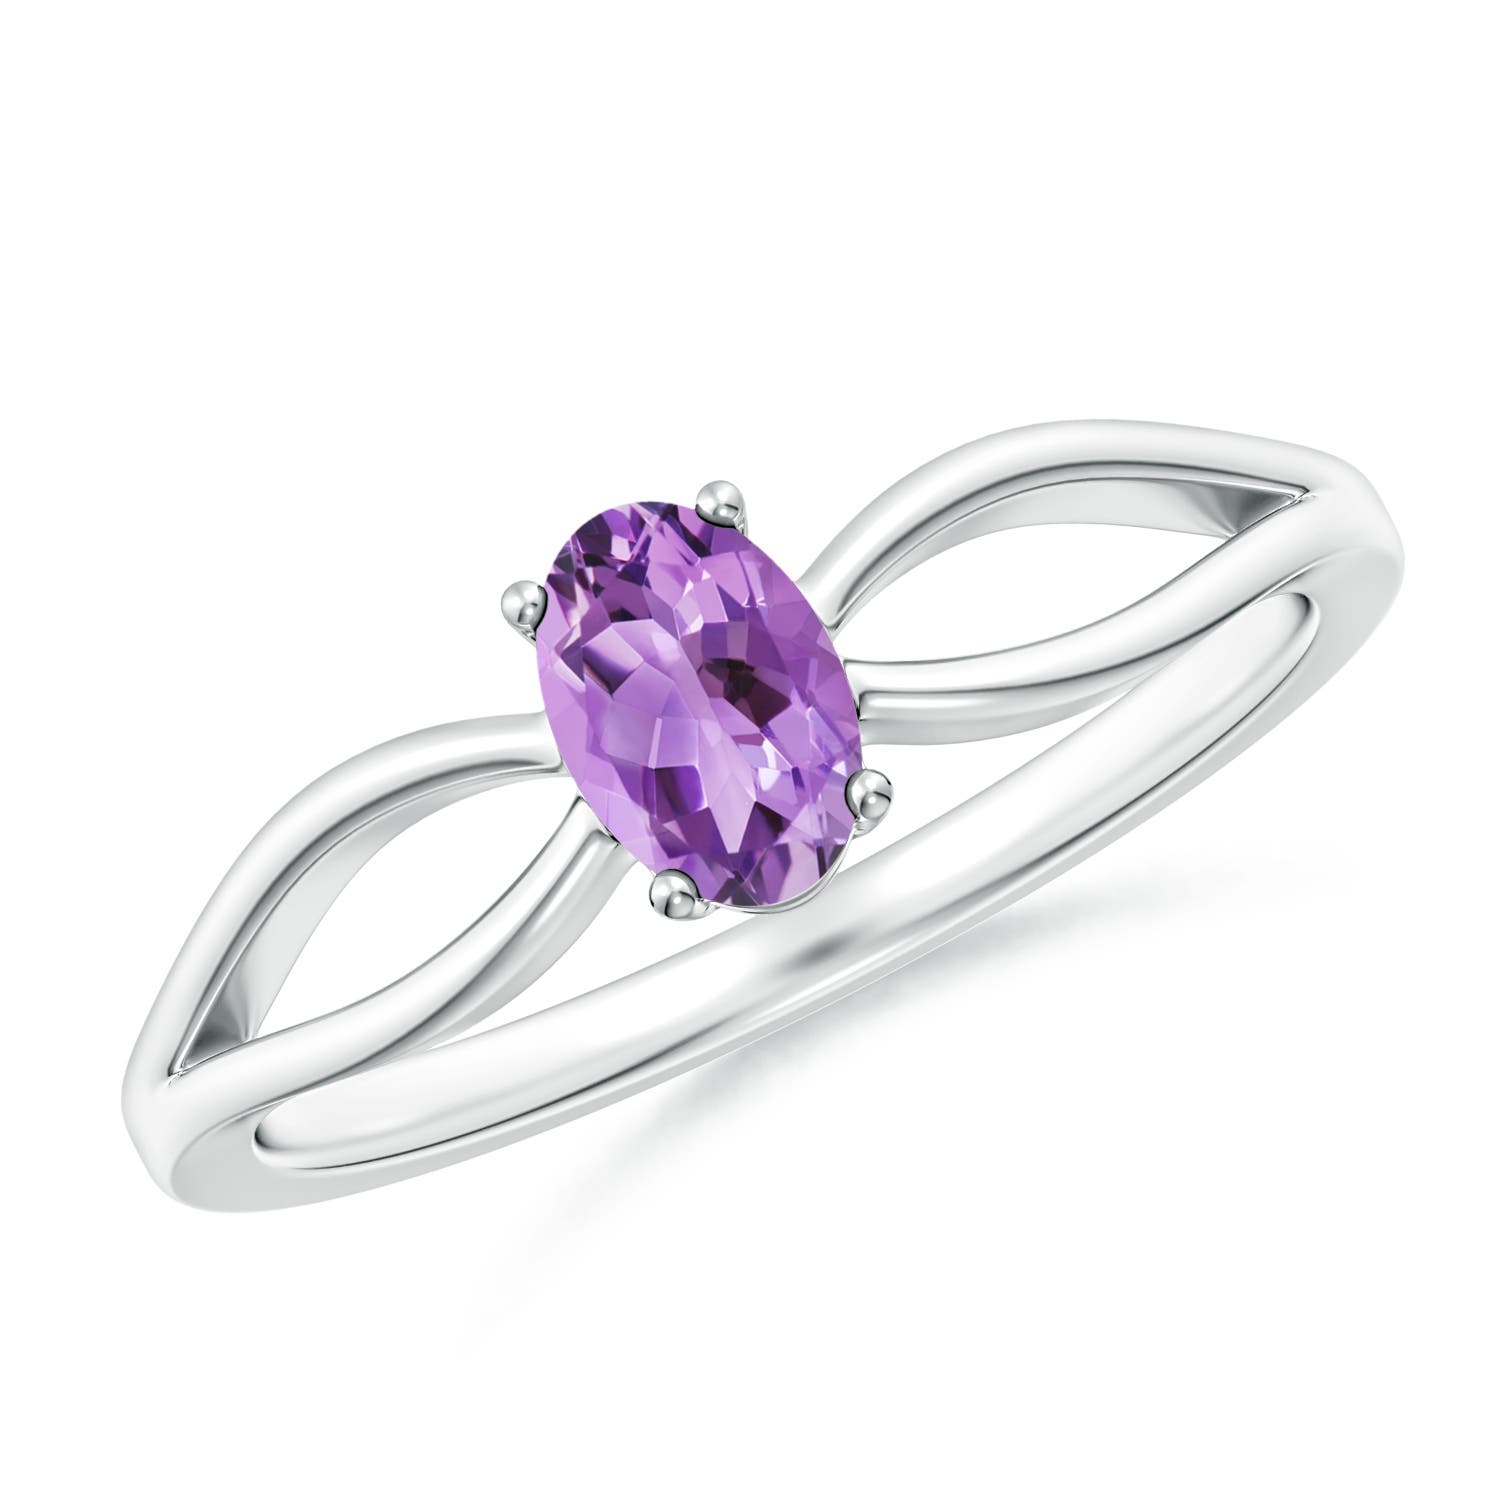 A - Amethyst / 0.4 CT / 14 KT White Gold